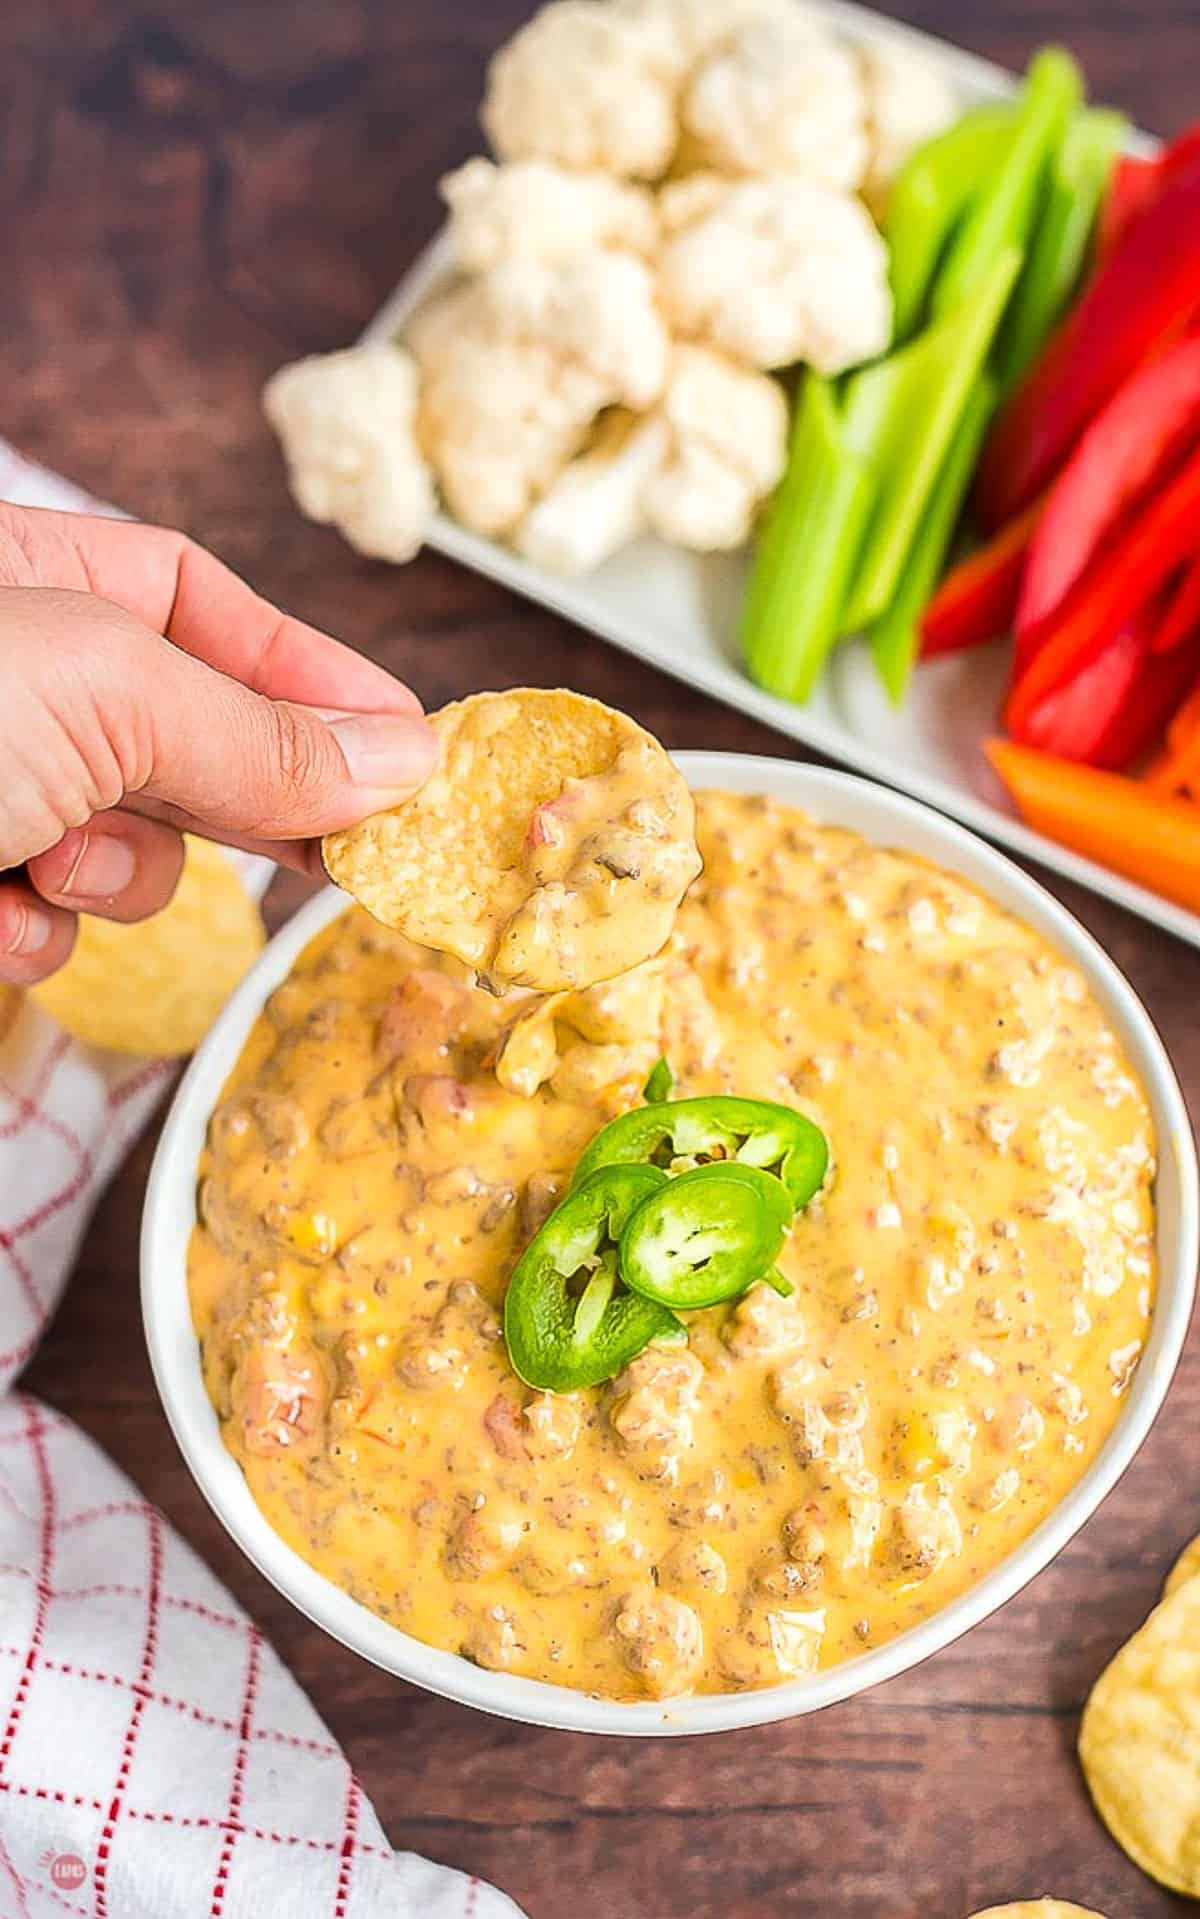 chip scooping out some cheese dip in a white bowl of cheesy beef dip topped with jalapenos with a tray of veggies in the background